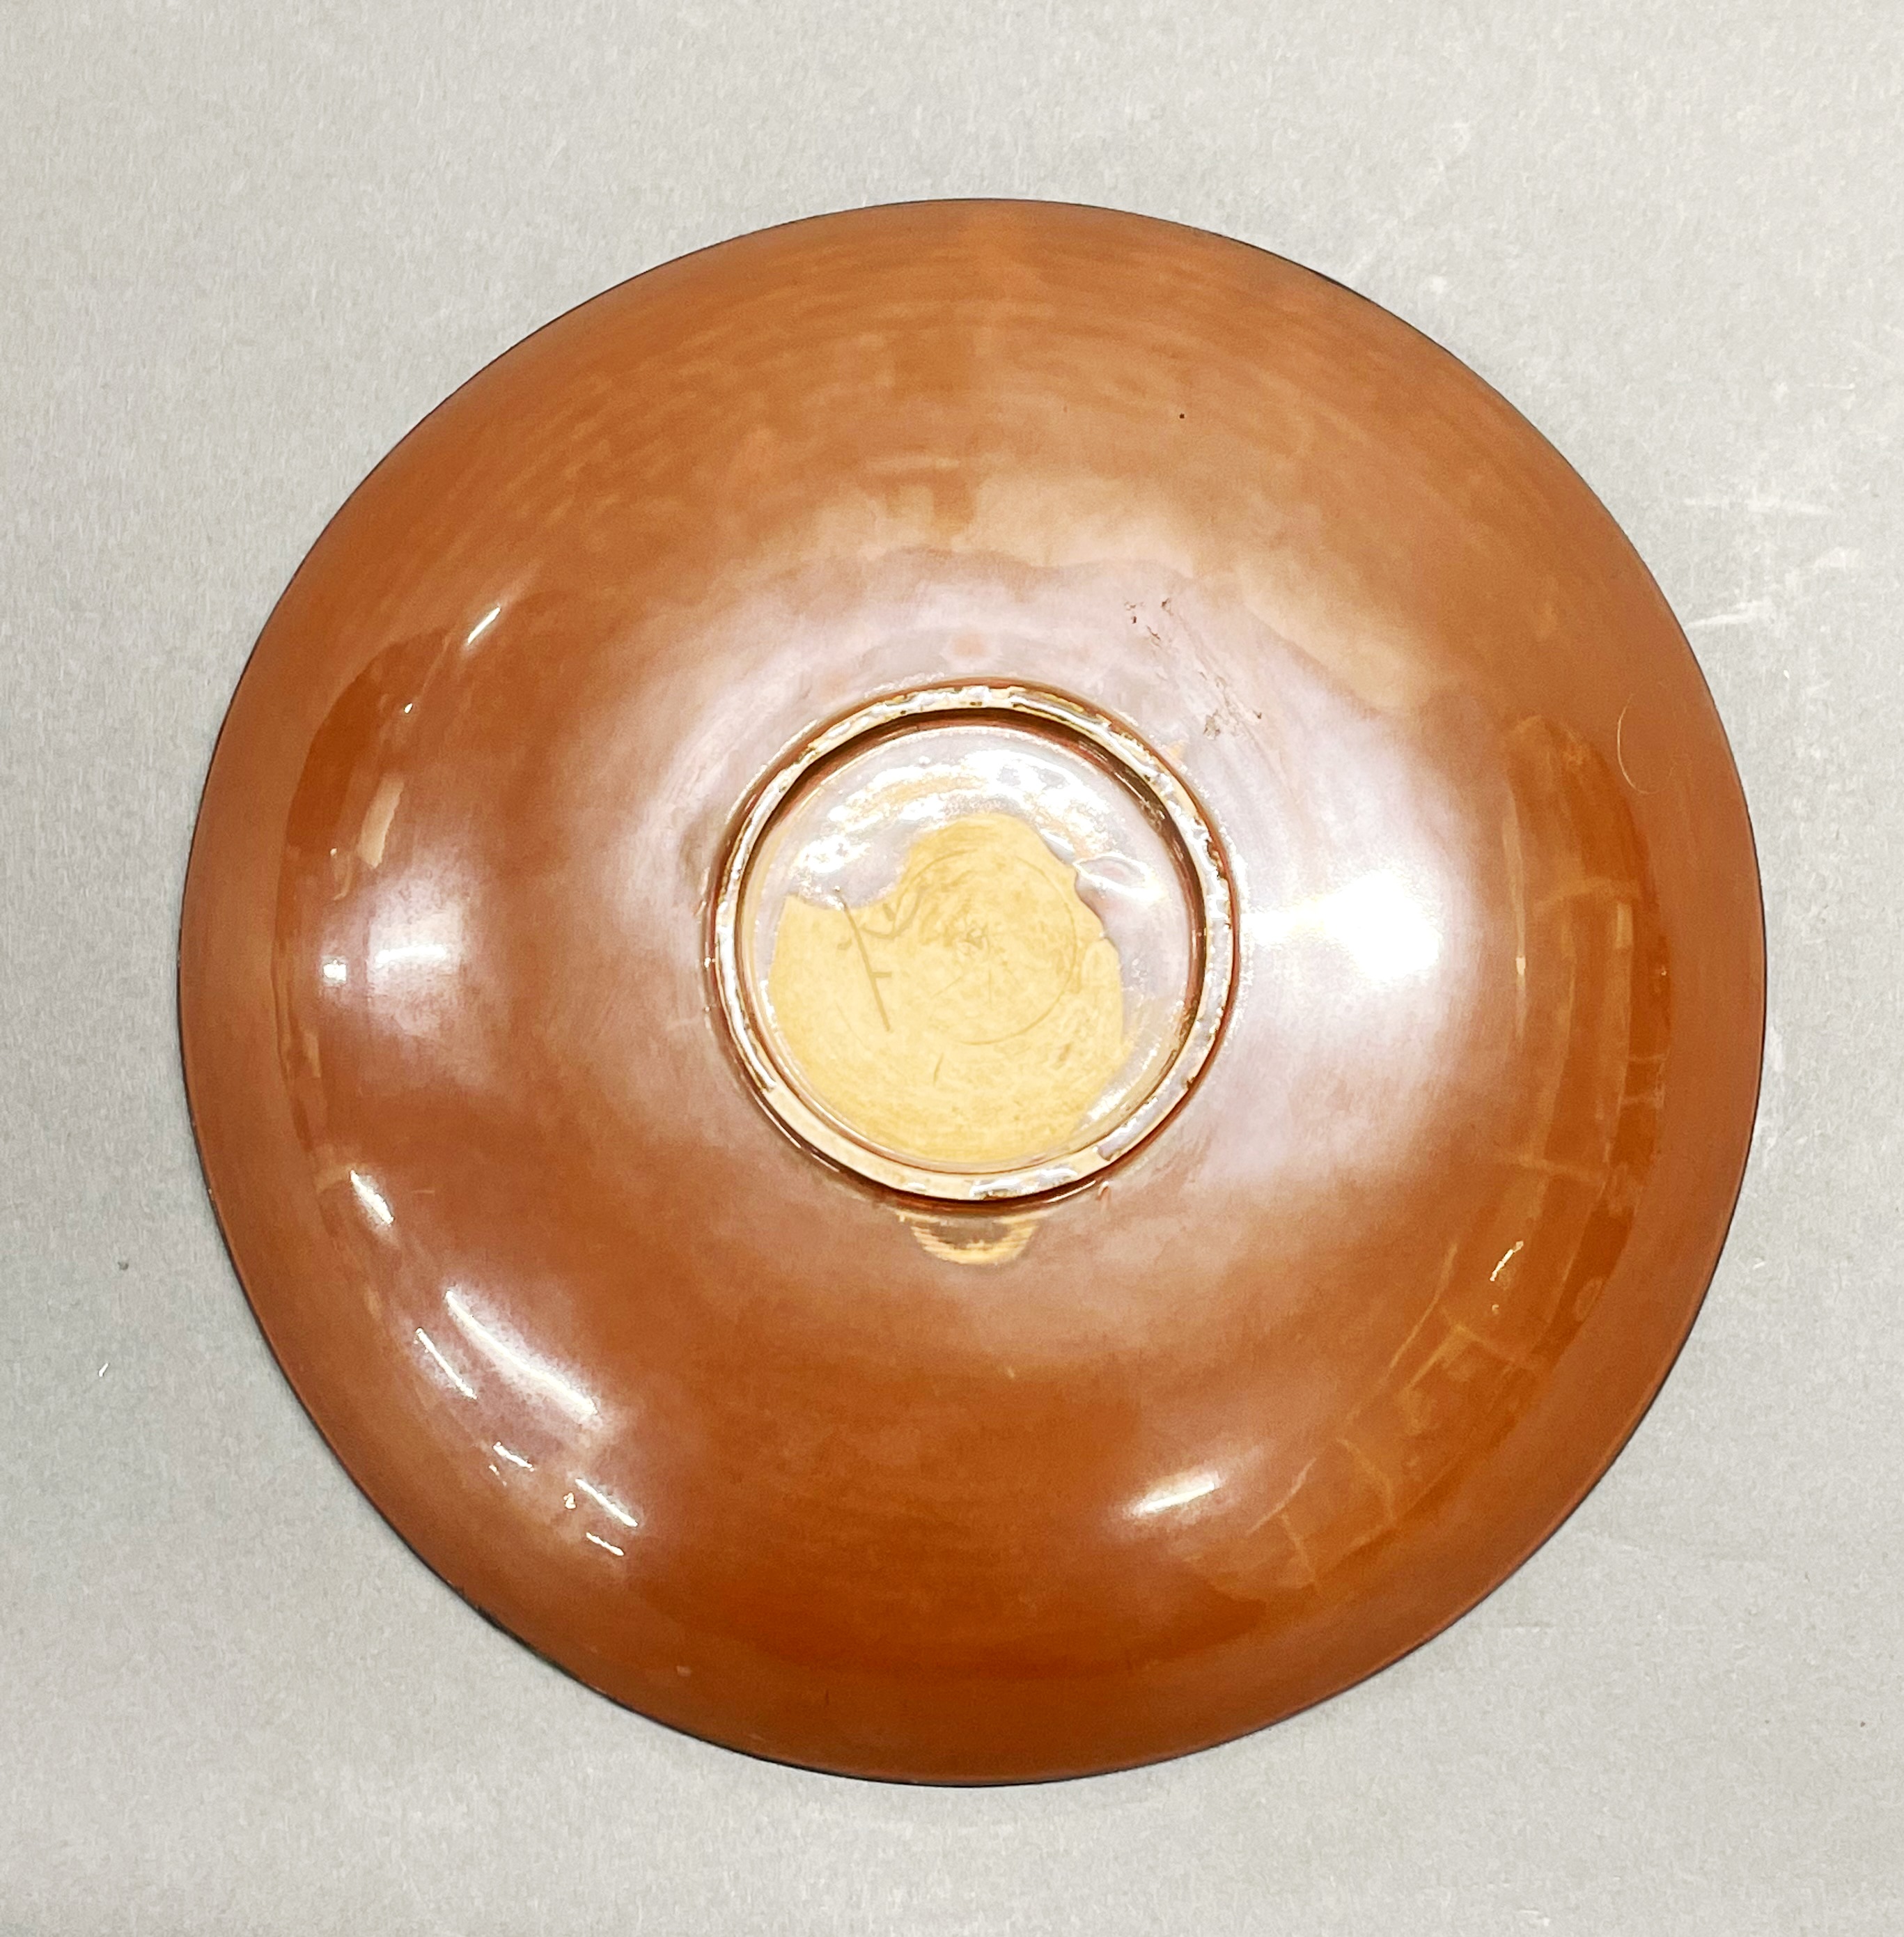 A fine Chinese white metal rimmed, brown glazed and relief decorated porcelain dish. Dia. 21.5cm, D. - Image 3 of 5